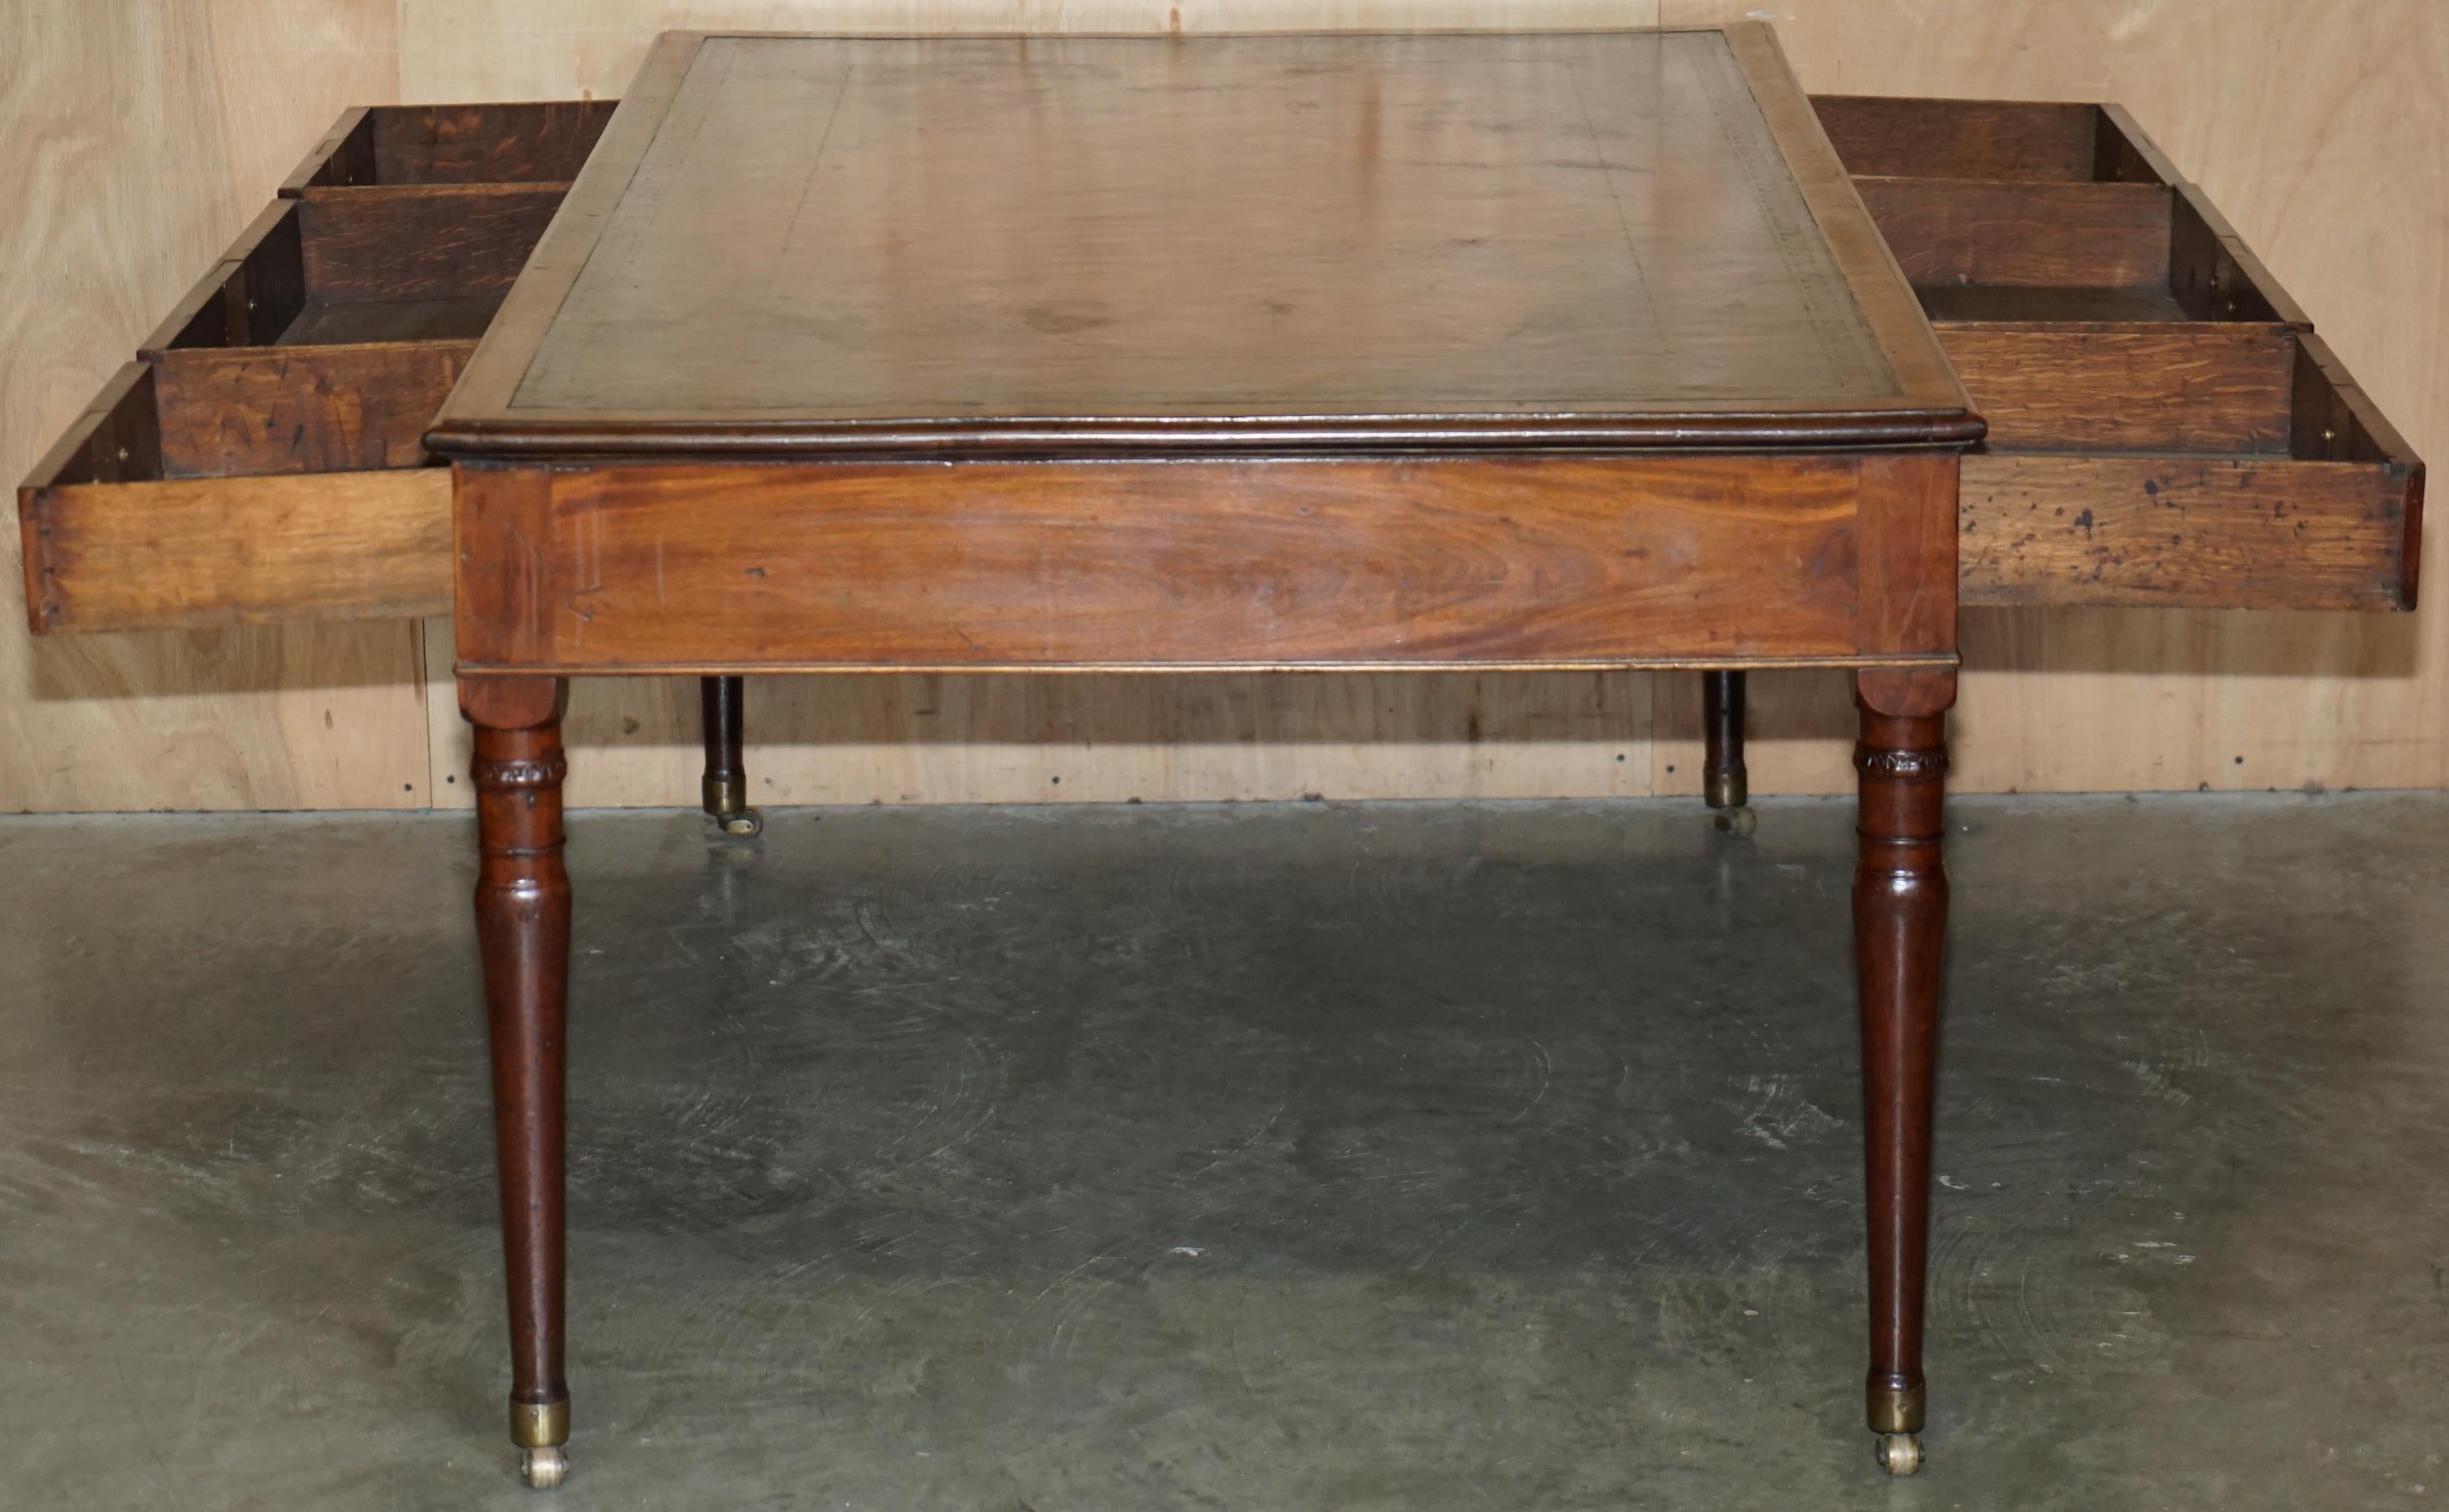 EXQUISITE ANTiQUE GEORGIAN IRISH 1780 RESTORED BROWN LEATHER WRITING TABLE DESK For Sale 12